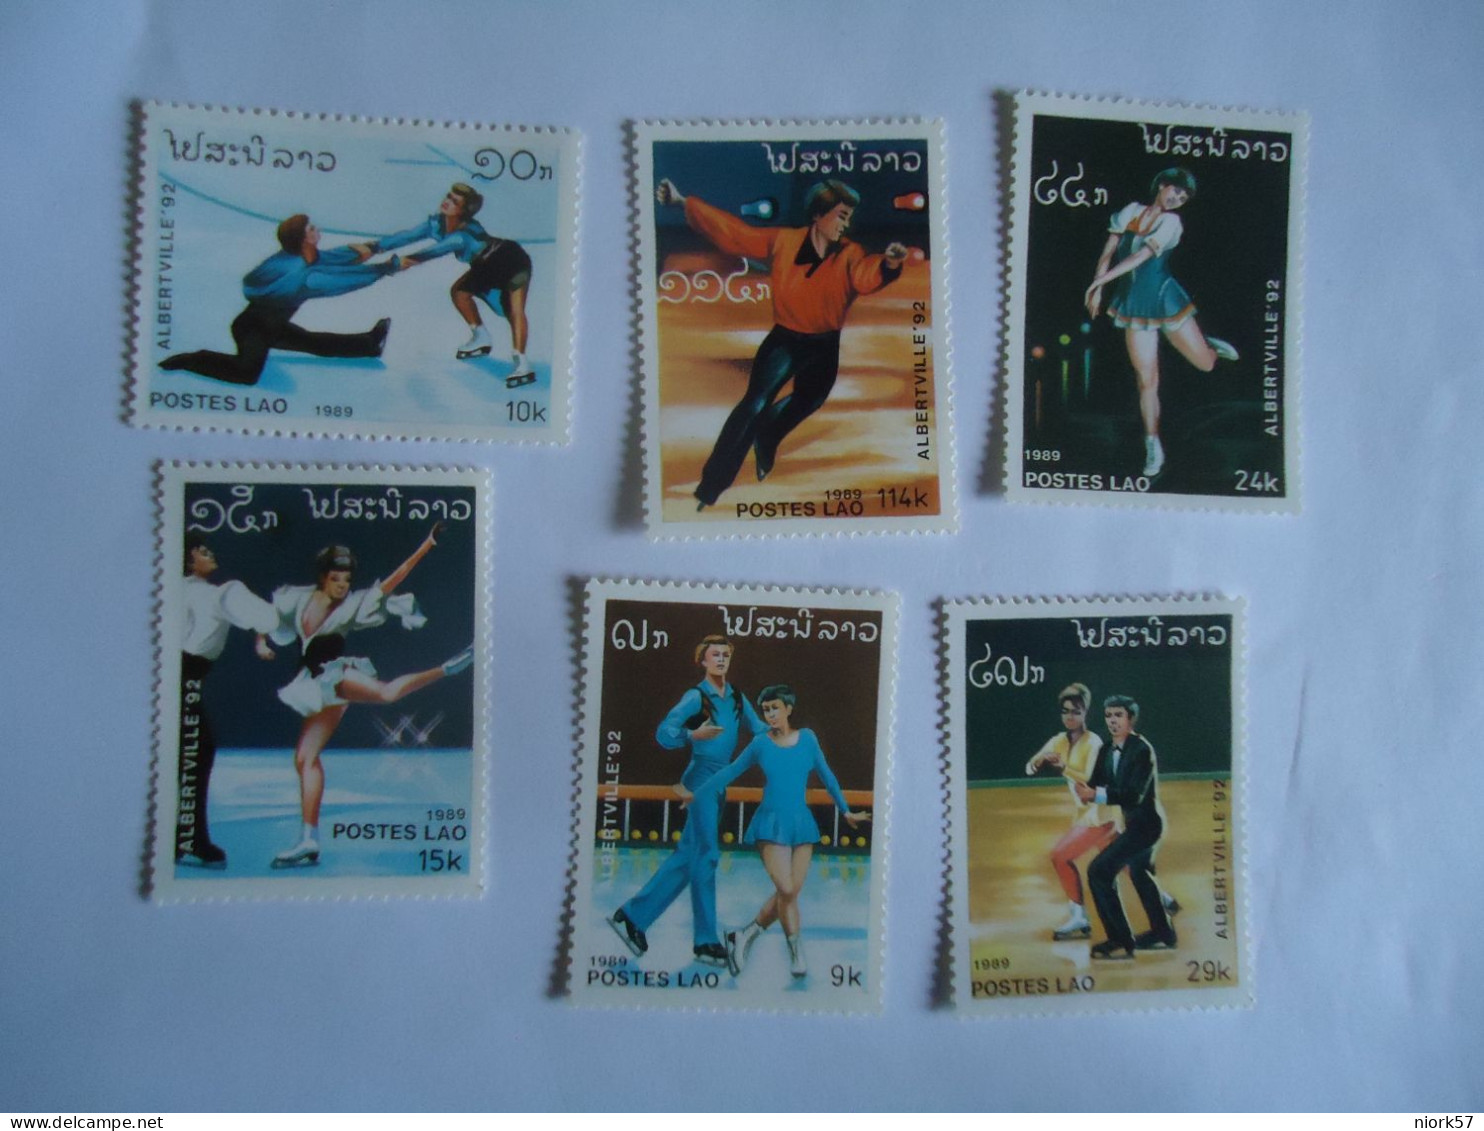 LAOS  MNH  STAMPS   SET  6  OLYMPIC  GAMES   LOS ANGELES 1984 - Verano 1984: Los Angeles